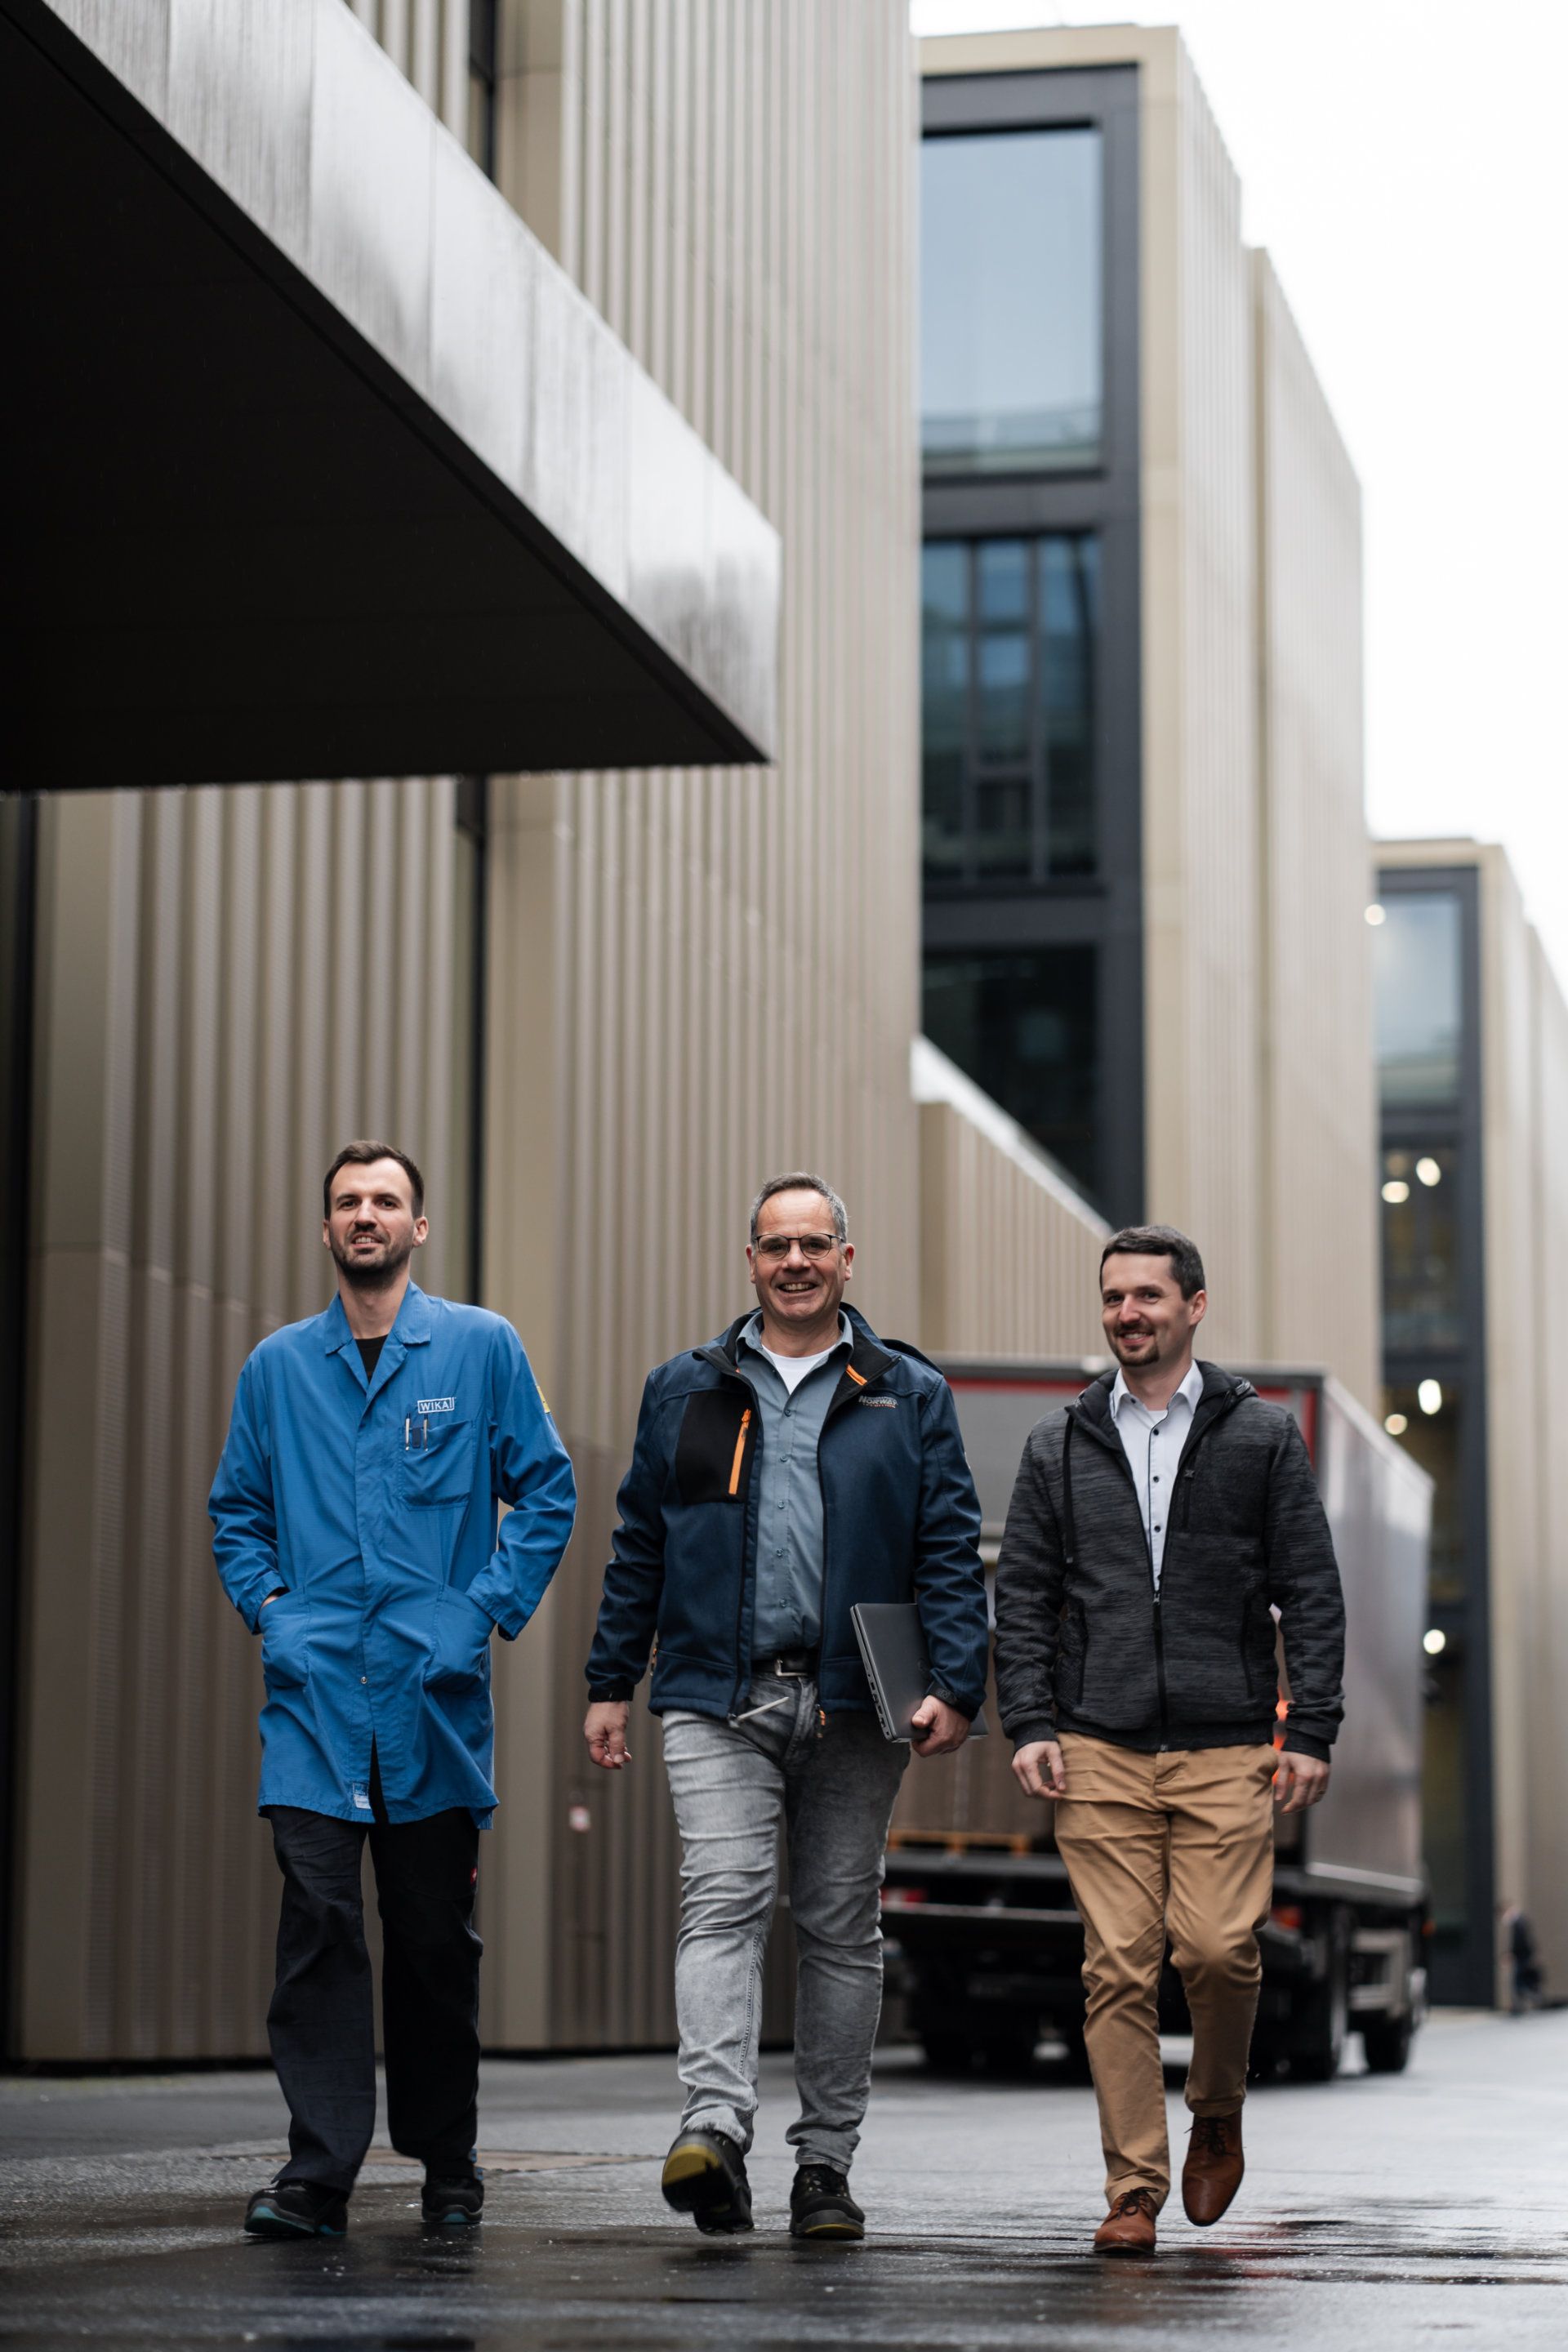 Three men confidently walking in an urban environment, each dressed in distinct styles – from casual to professional – showcasing diversity in jobs.